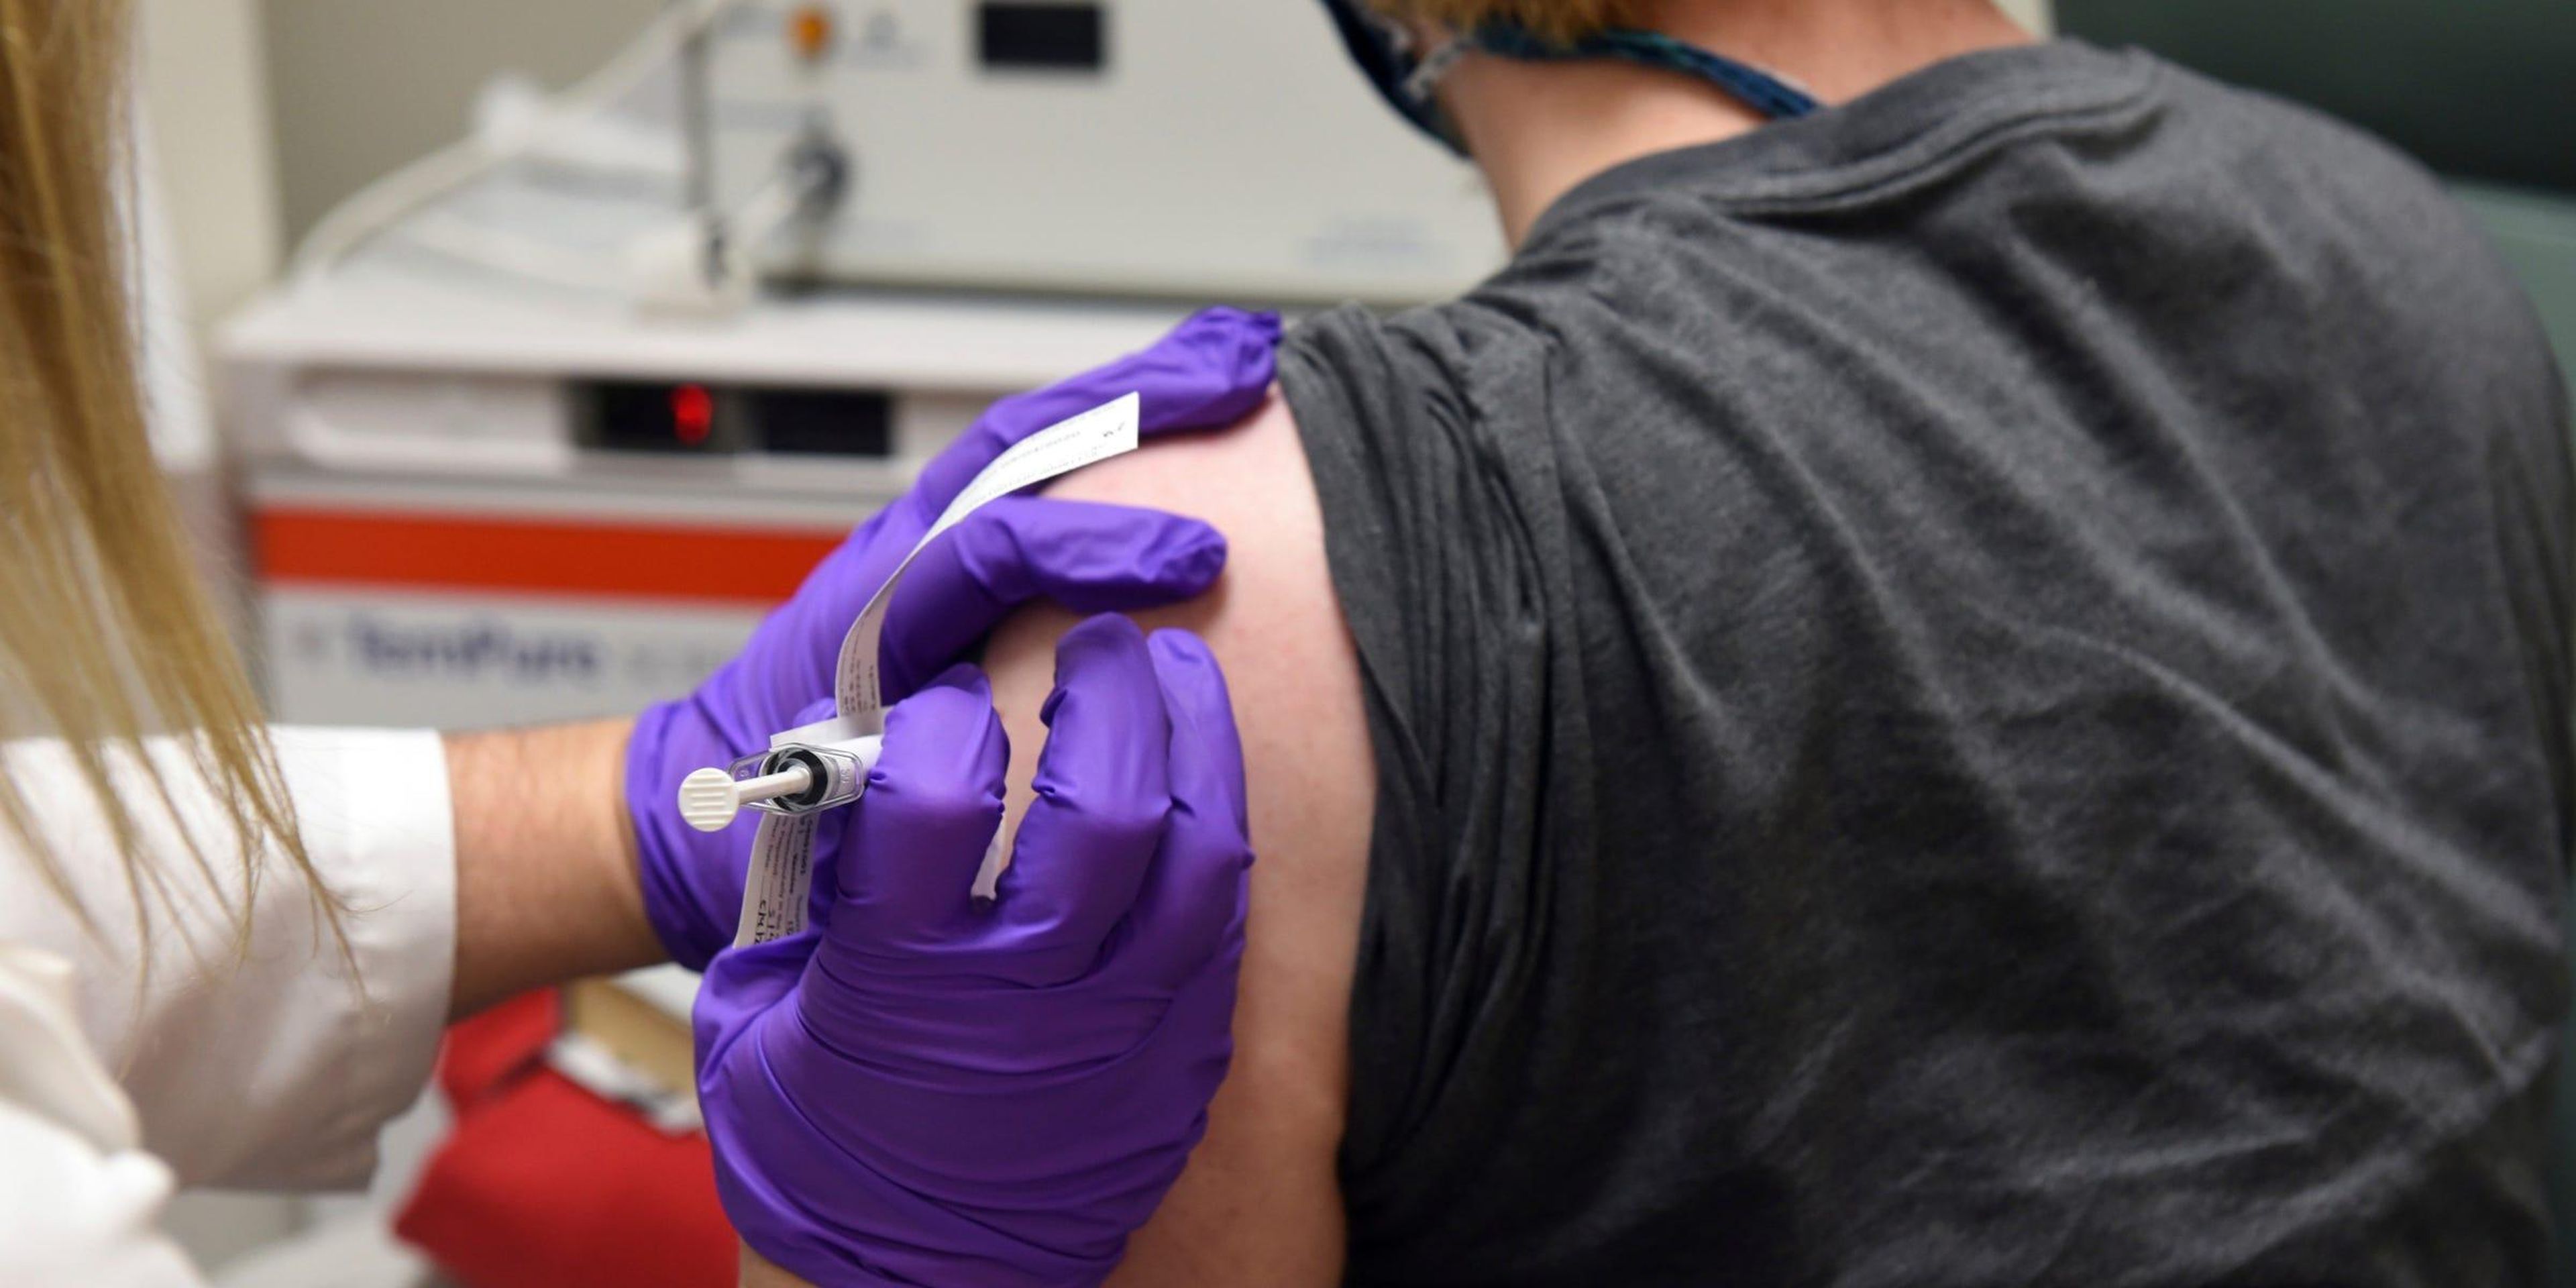 A patient enrolled in a coronavirus vaccine clinical trial receives an injection, May 4, 2020.